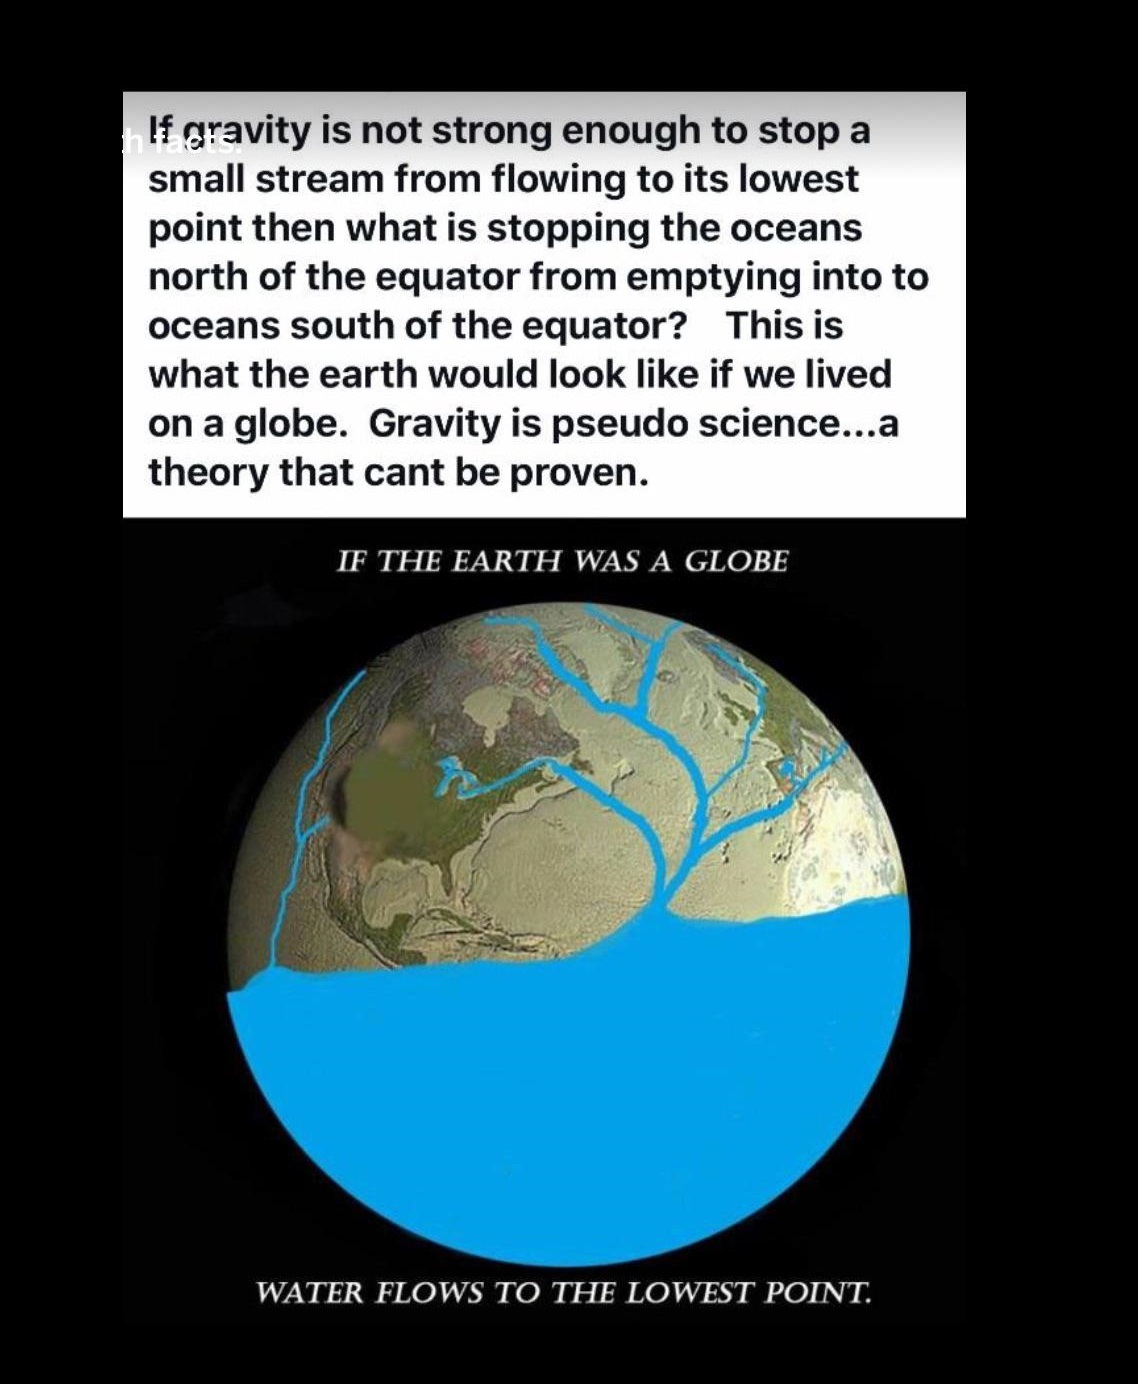 flat earth memes - lf gravity is not strong enough to stop a small stream from flowing to its lowest point then what is stopping the oceans north of the equator from emptying into to oceans south of the equator? This is what the earth would look if we liv